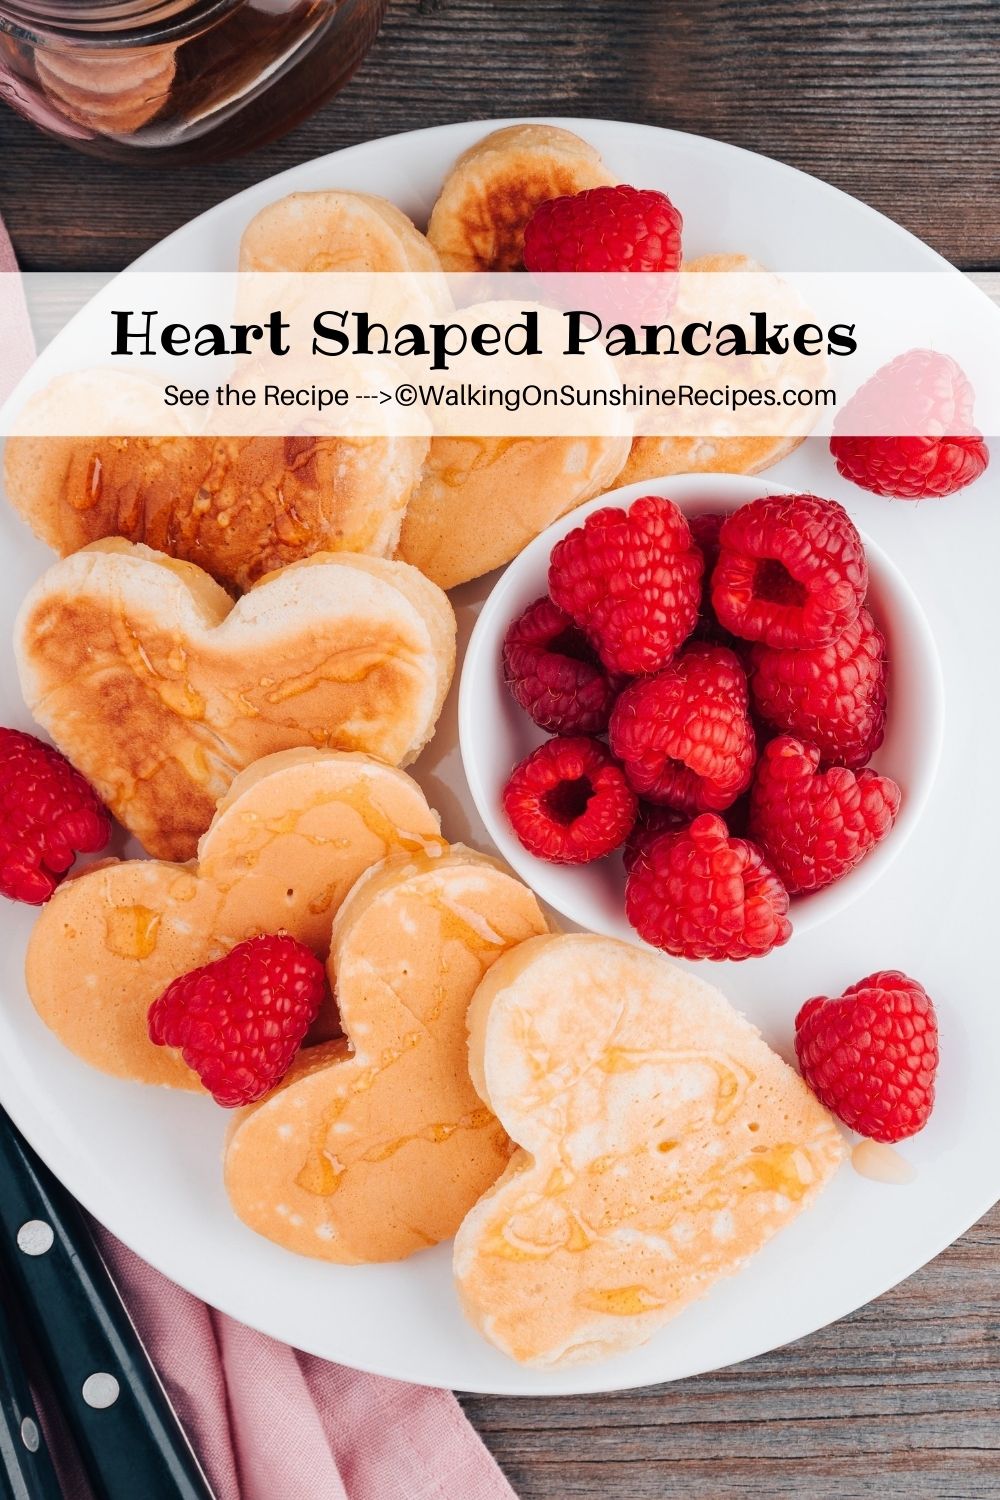 Heart Shaped Pancakes with raspberries from WOS